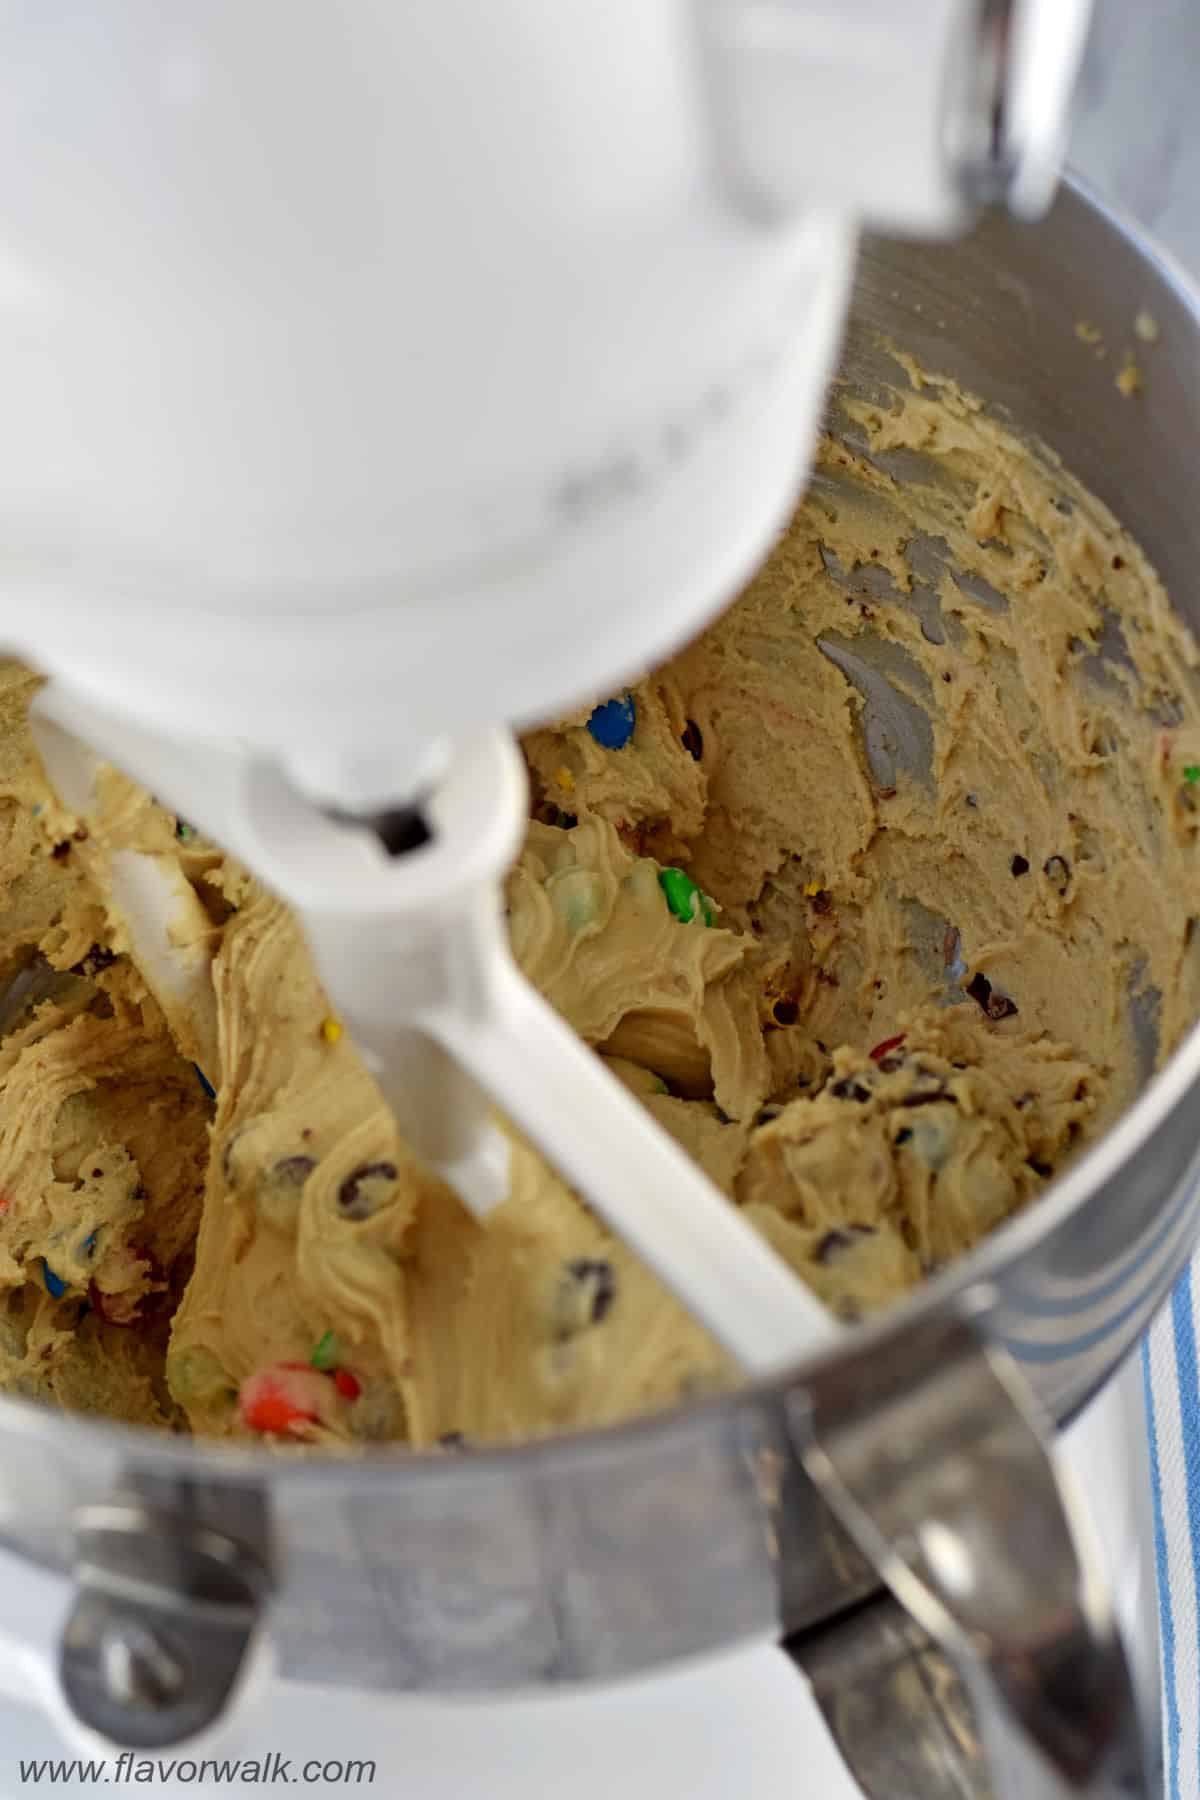 No bake cookie dough with chocolate chips and M&M's in the bowl of a stand mixer.